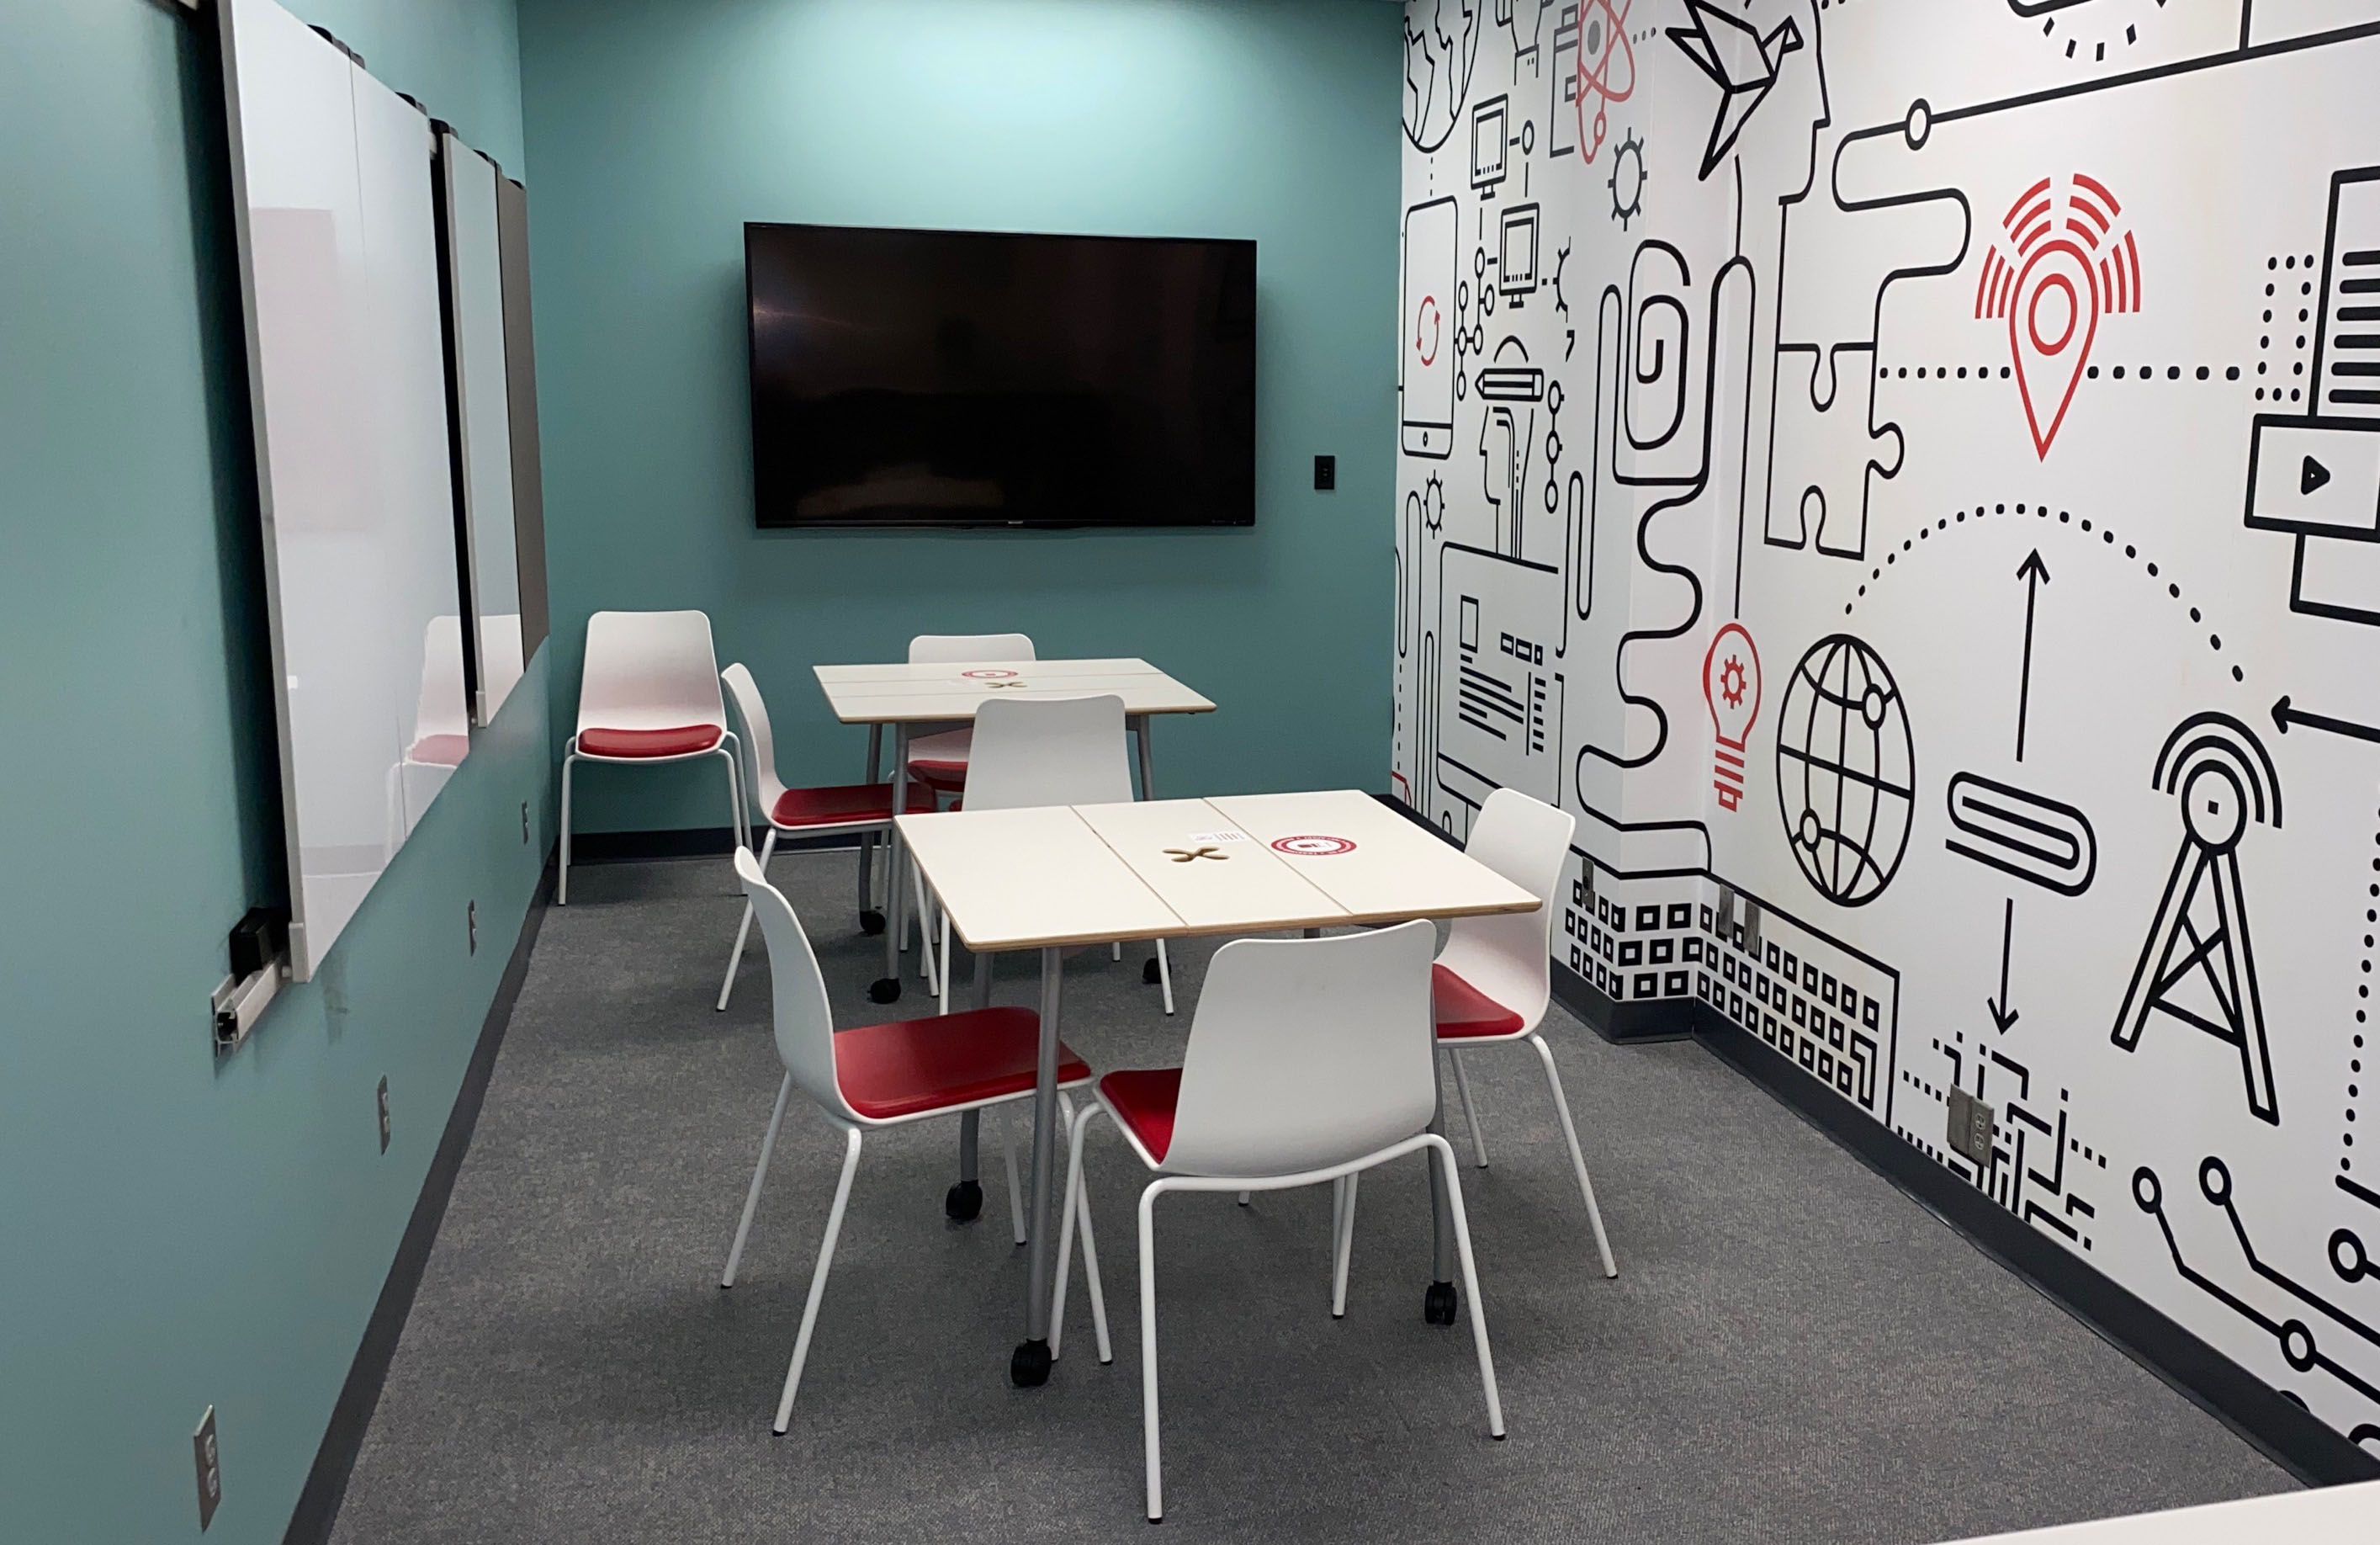 Tables and chairs with whiteboards on the walls